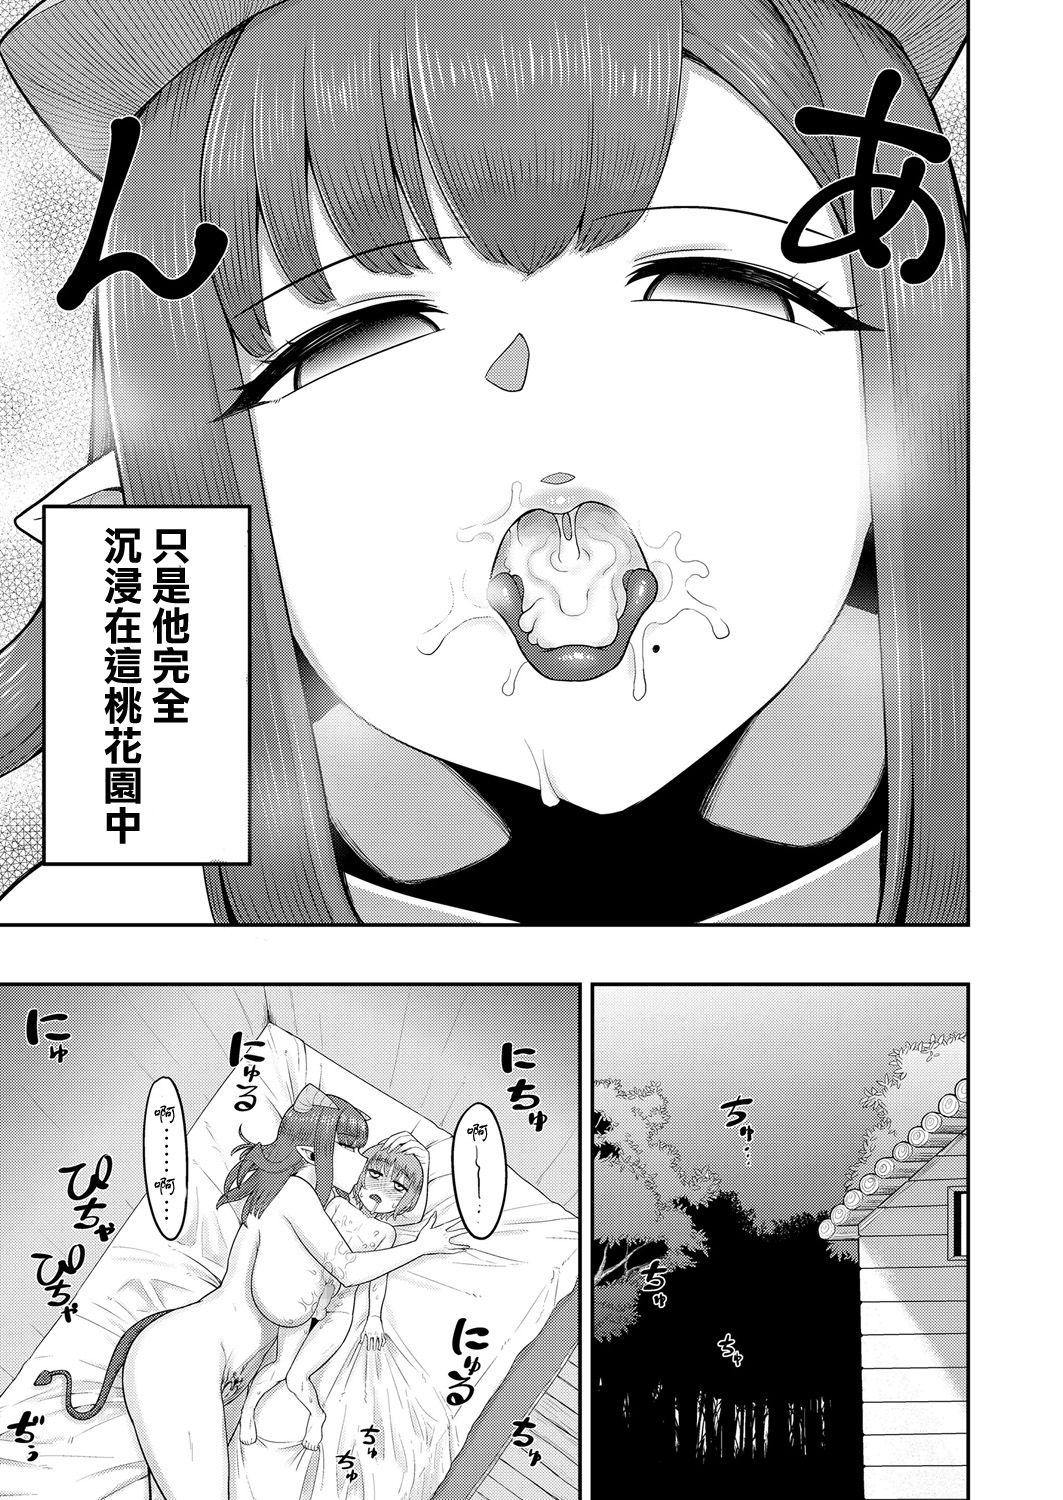 Shemale Porn Imprinting Imp | 印記淫魔 Home - Page 10